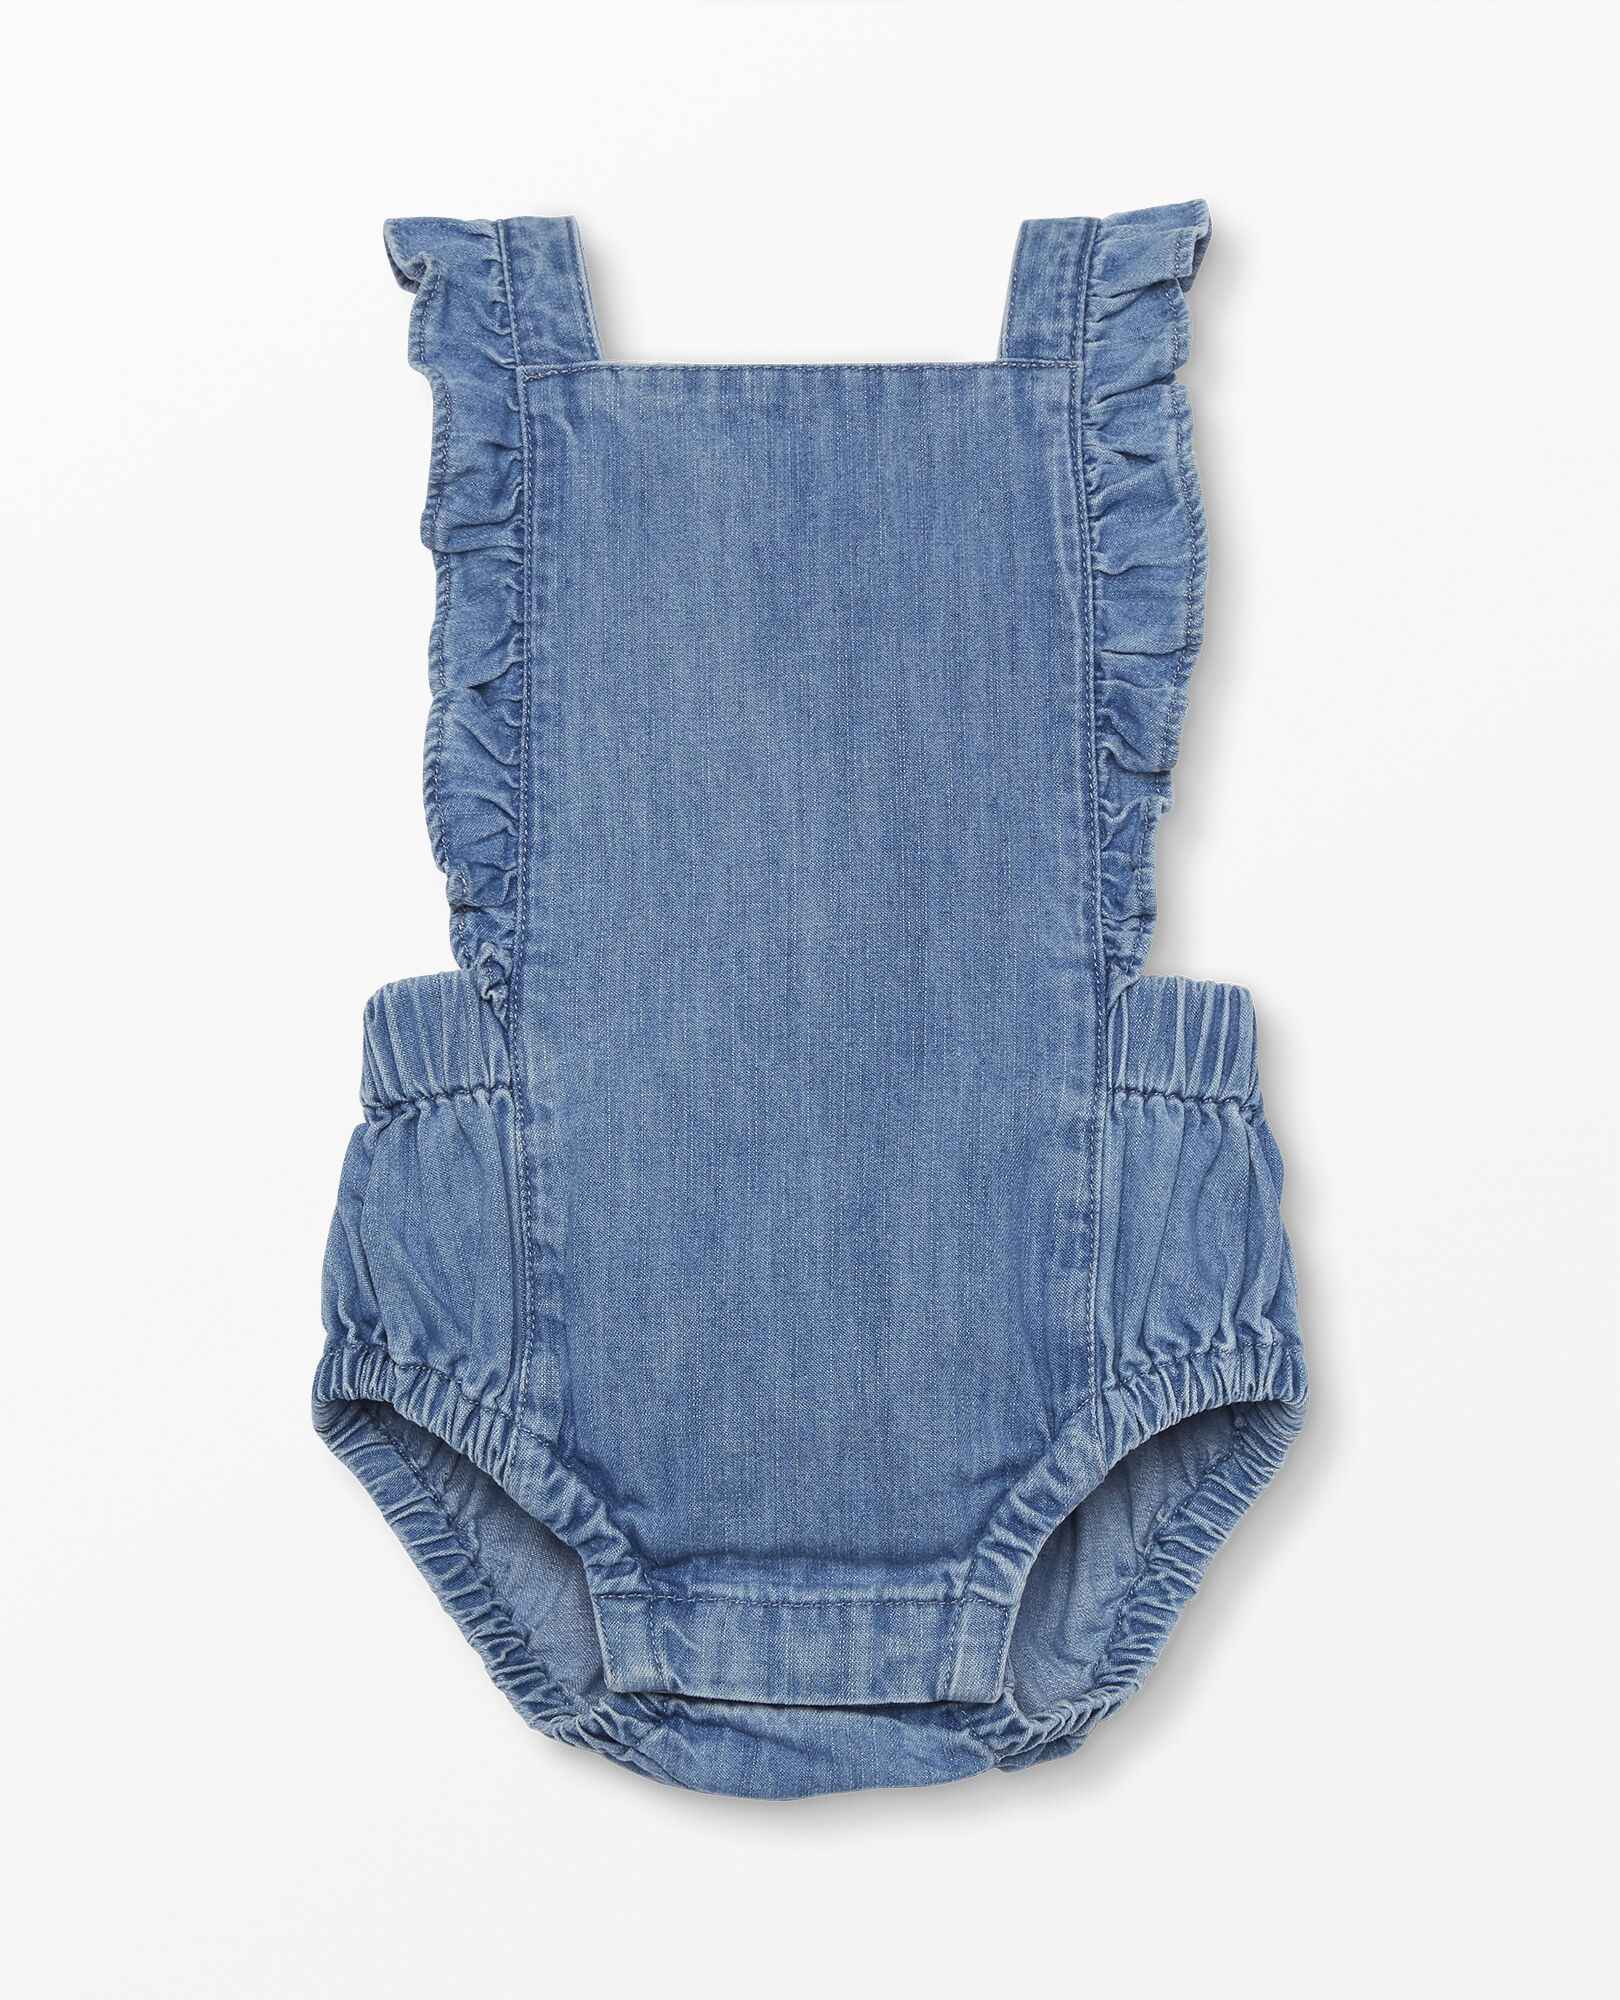 NWT Hanna Andersson Butterfly Chambray Denim Shortalls Baby Toddler Girl 